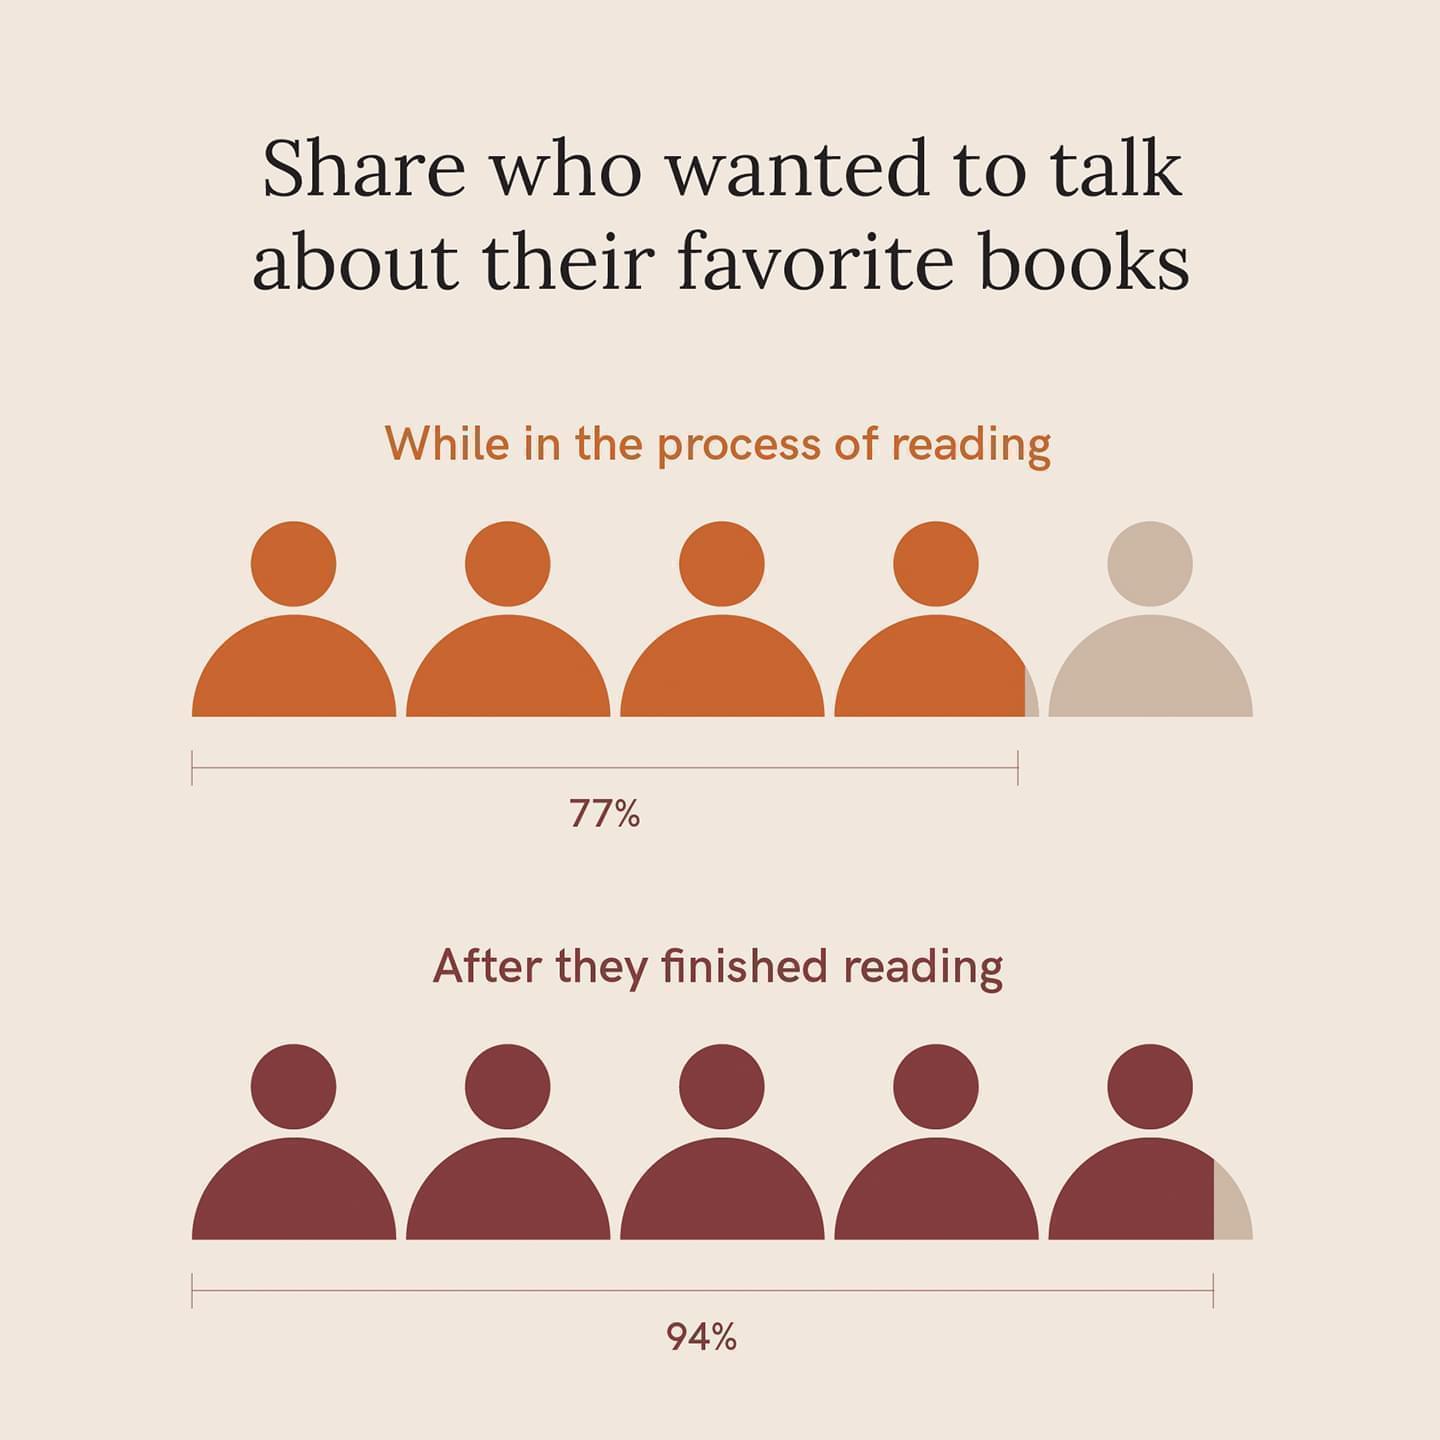 An infographic taken from survey results showing the share of people who want to talk to others about their favorite books